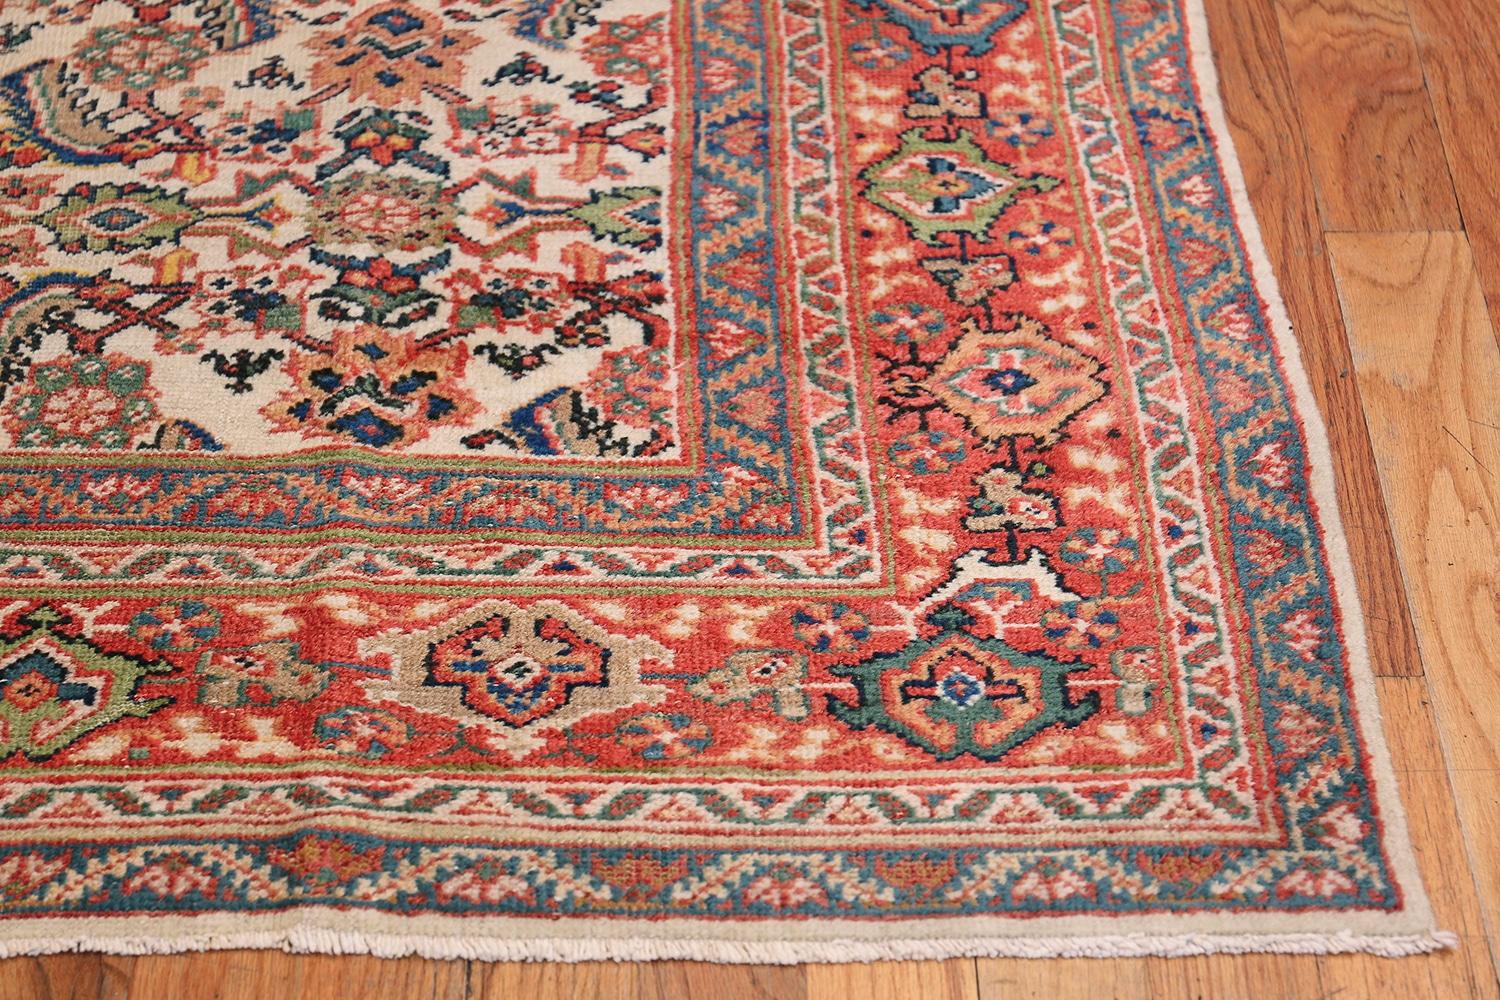 Wool Antique Persian Sultanabad Carpet. Size: 8 ft x 10 ft 7 in (2.44 m x 3.23 m)